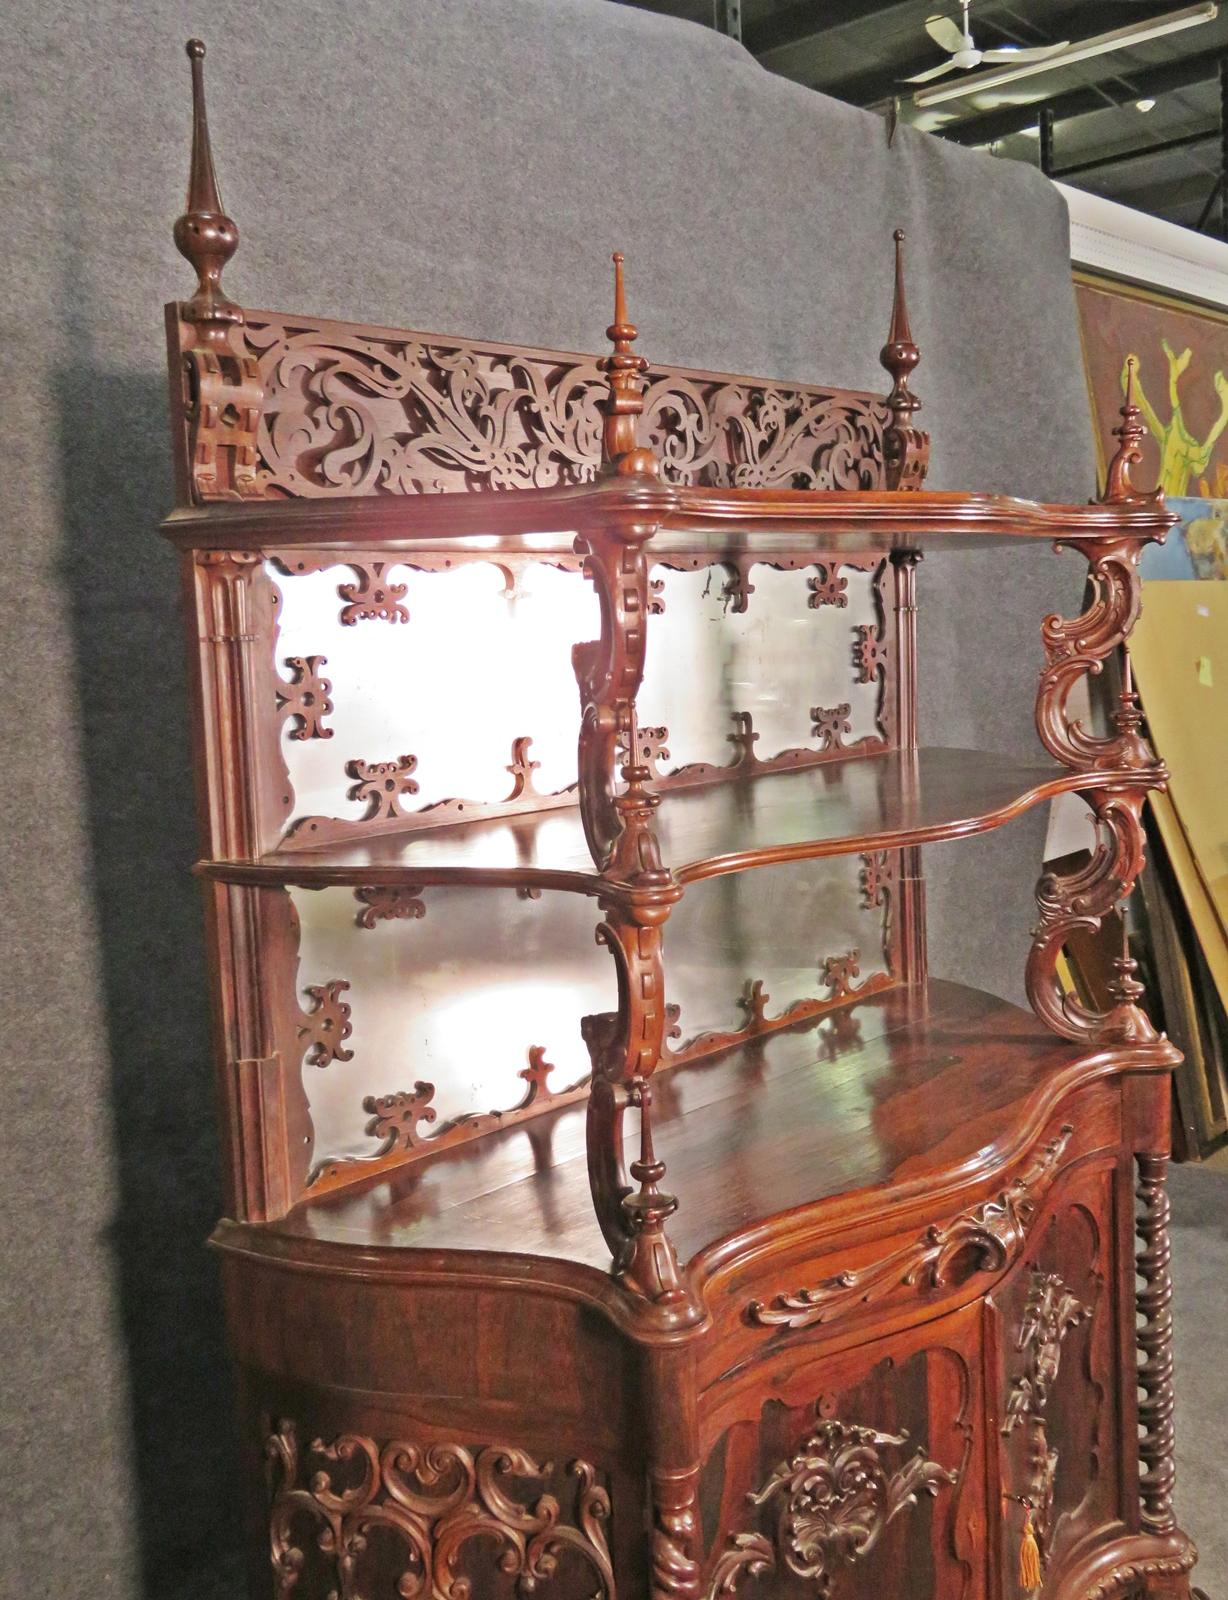 High Victorian Rare Rosewood American Victorian Etagere Attributed to Alexander Roux C1860s For Sale